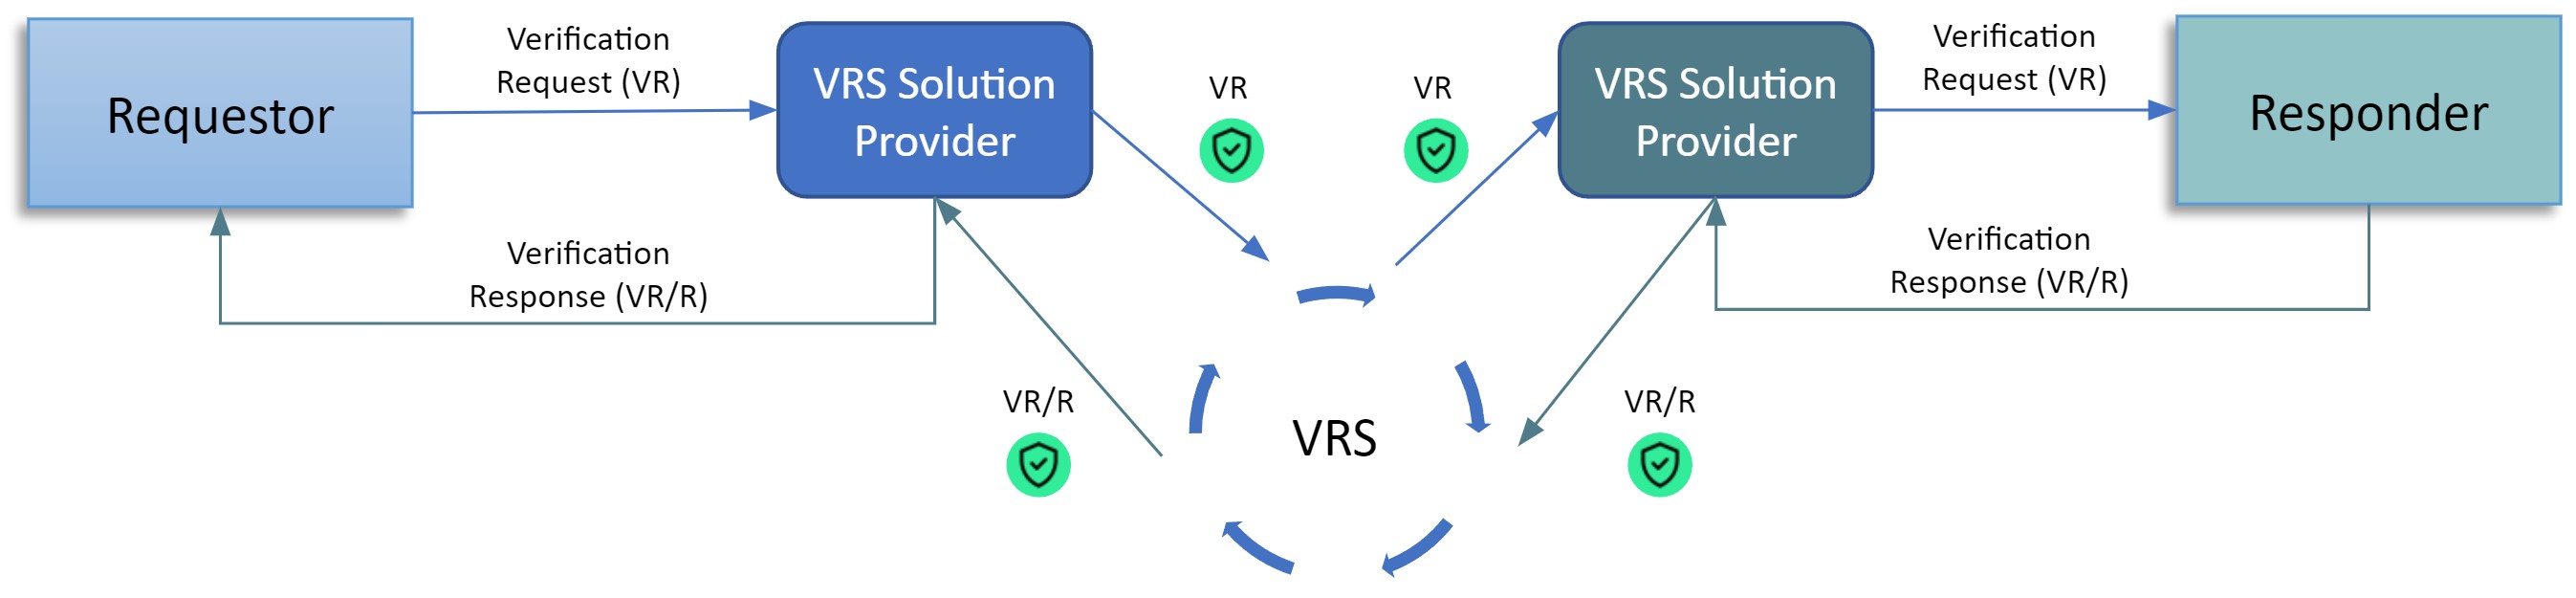 vrs architecture with credentials